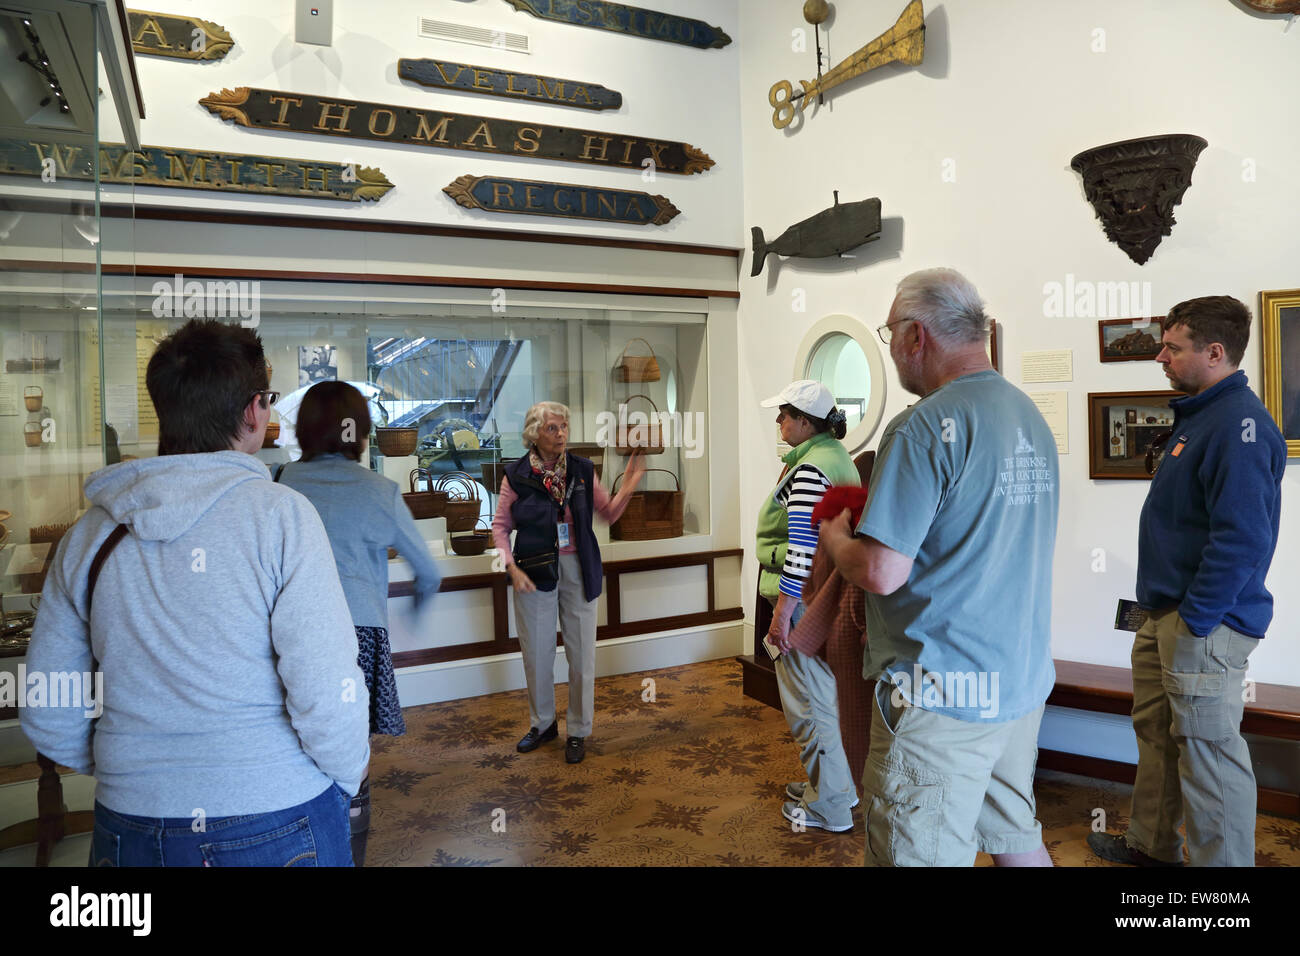 Tour guide gives tour to visitors at the Nantucket Whaling Museum, Nantucket, Massachusetts Stock Photo